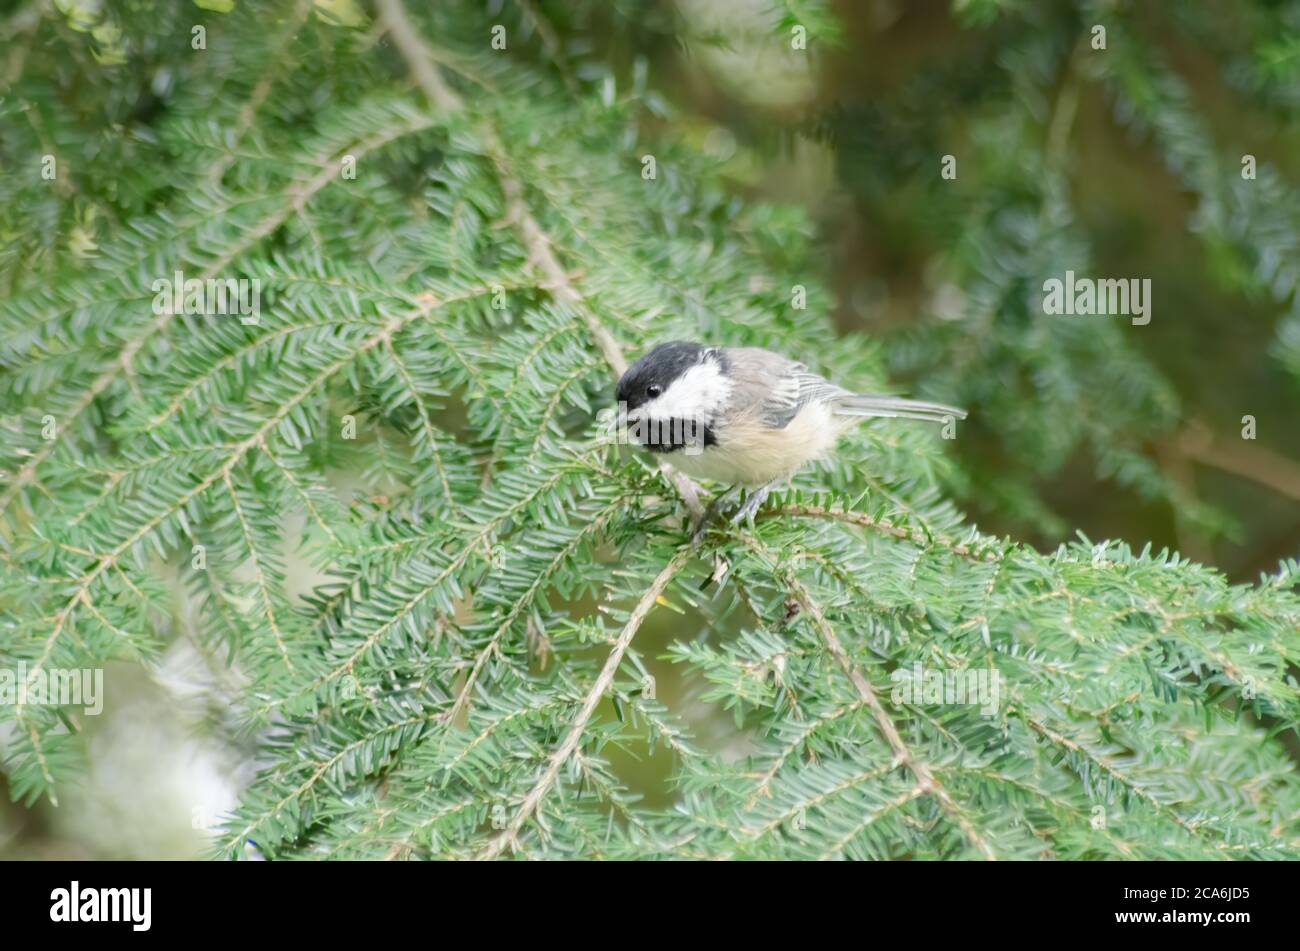 A Black-capped Chickadee (Poecile atricapillus) perched on a branch in the woods Stock Photo